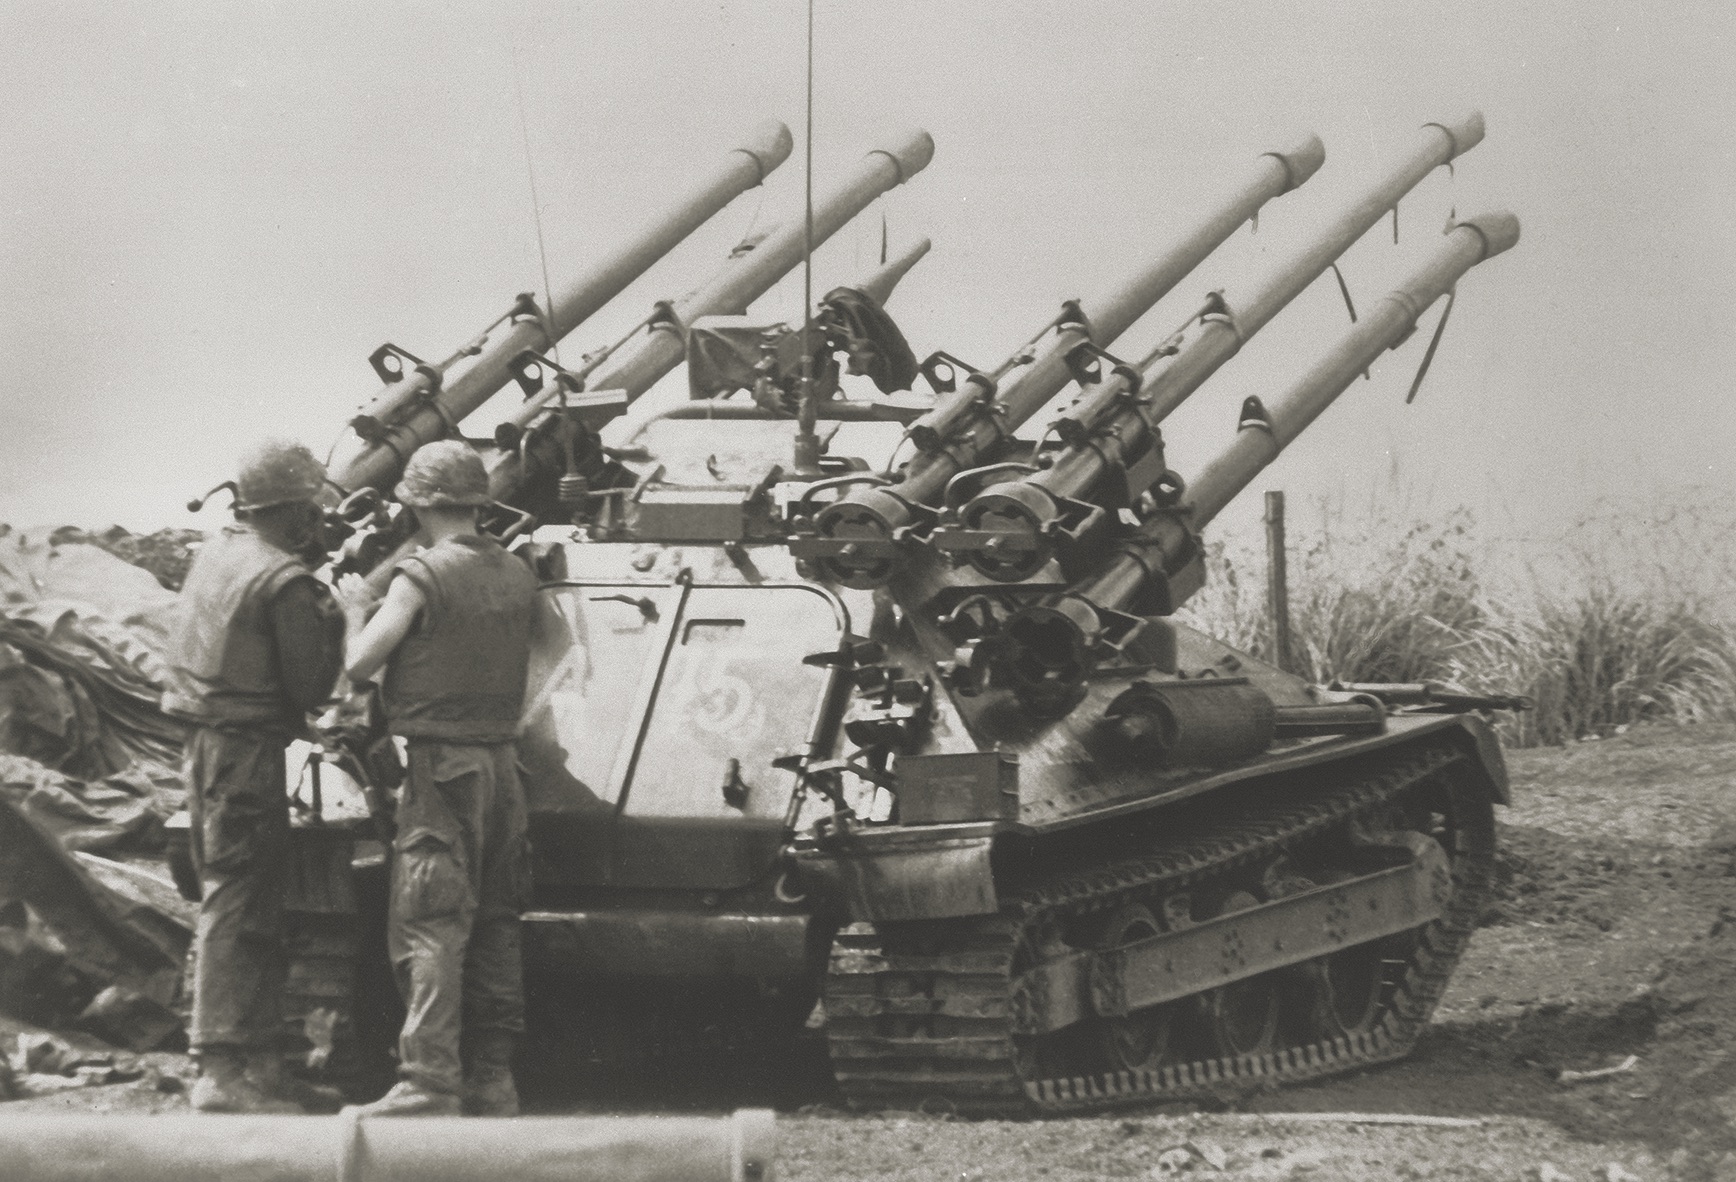 M50 Ontos, with six 106 mm recoilless rifles, traveled with Task Force Robbie. This one is elsewhere in March 1968. (U.S. Army)